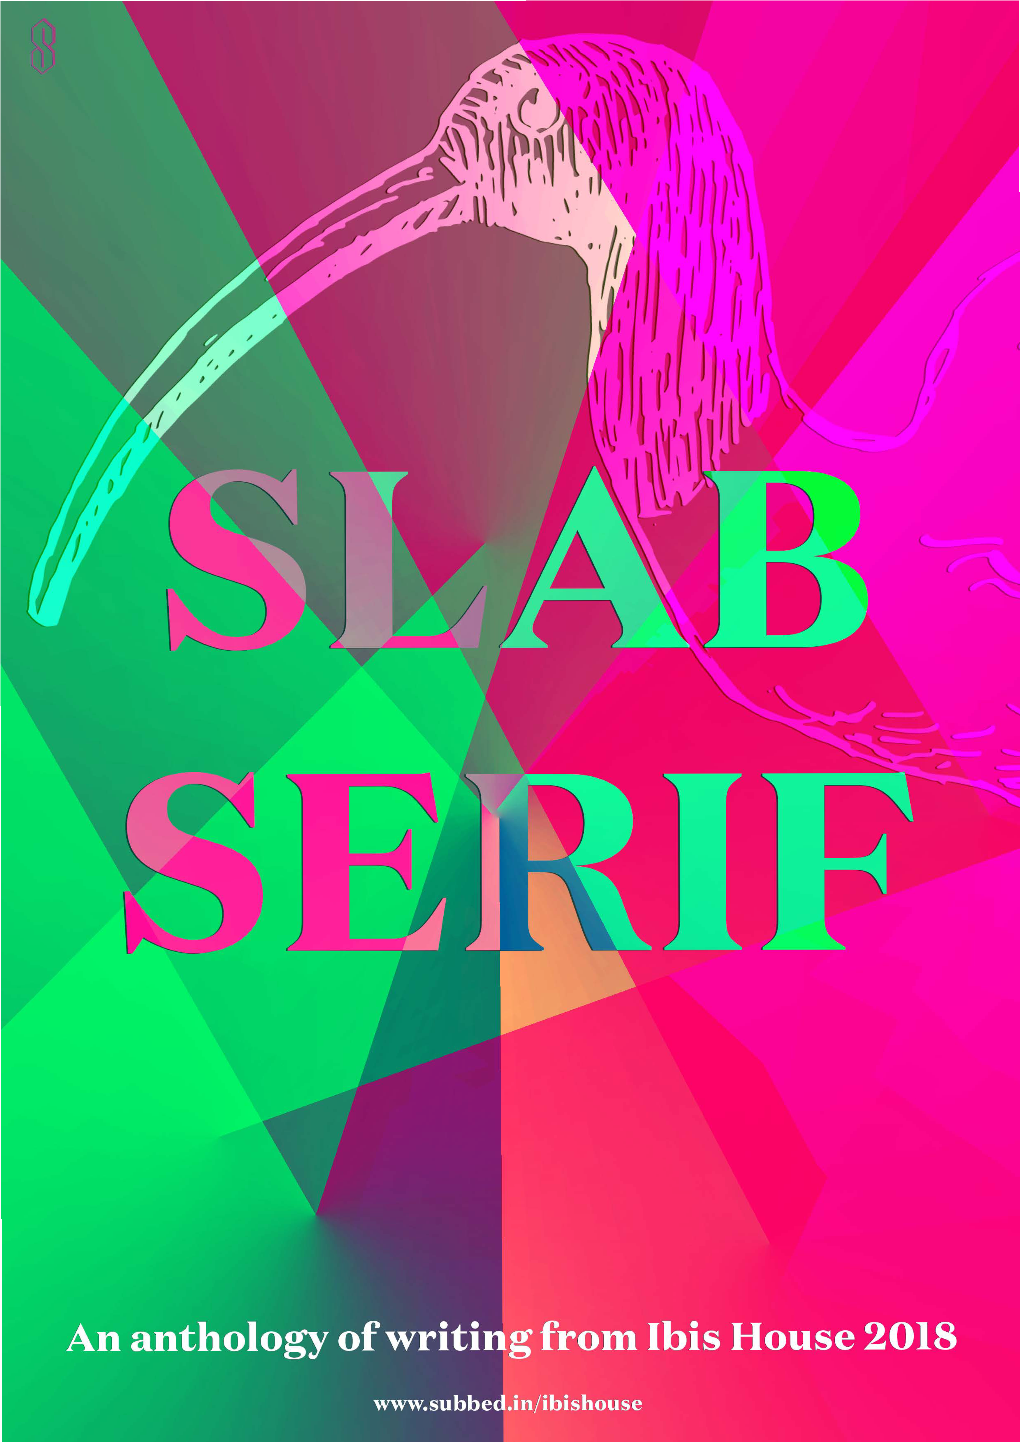 SLAB SERIF Anthologises All the Work Published by Ibis House in 2018 in One Convenient and Downloadable PDF